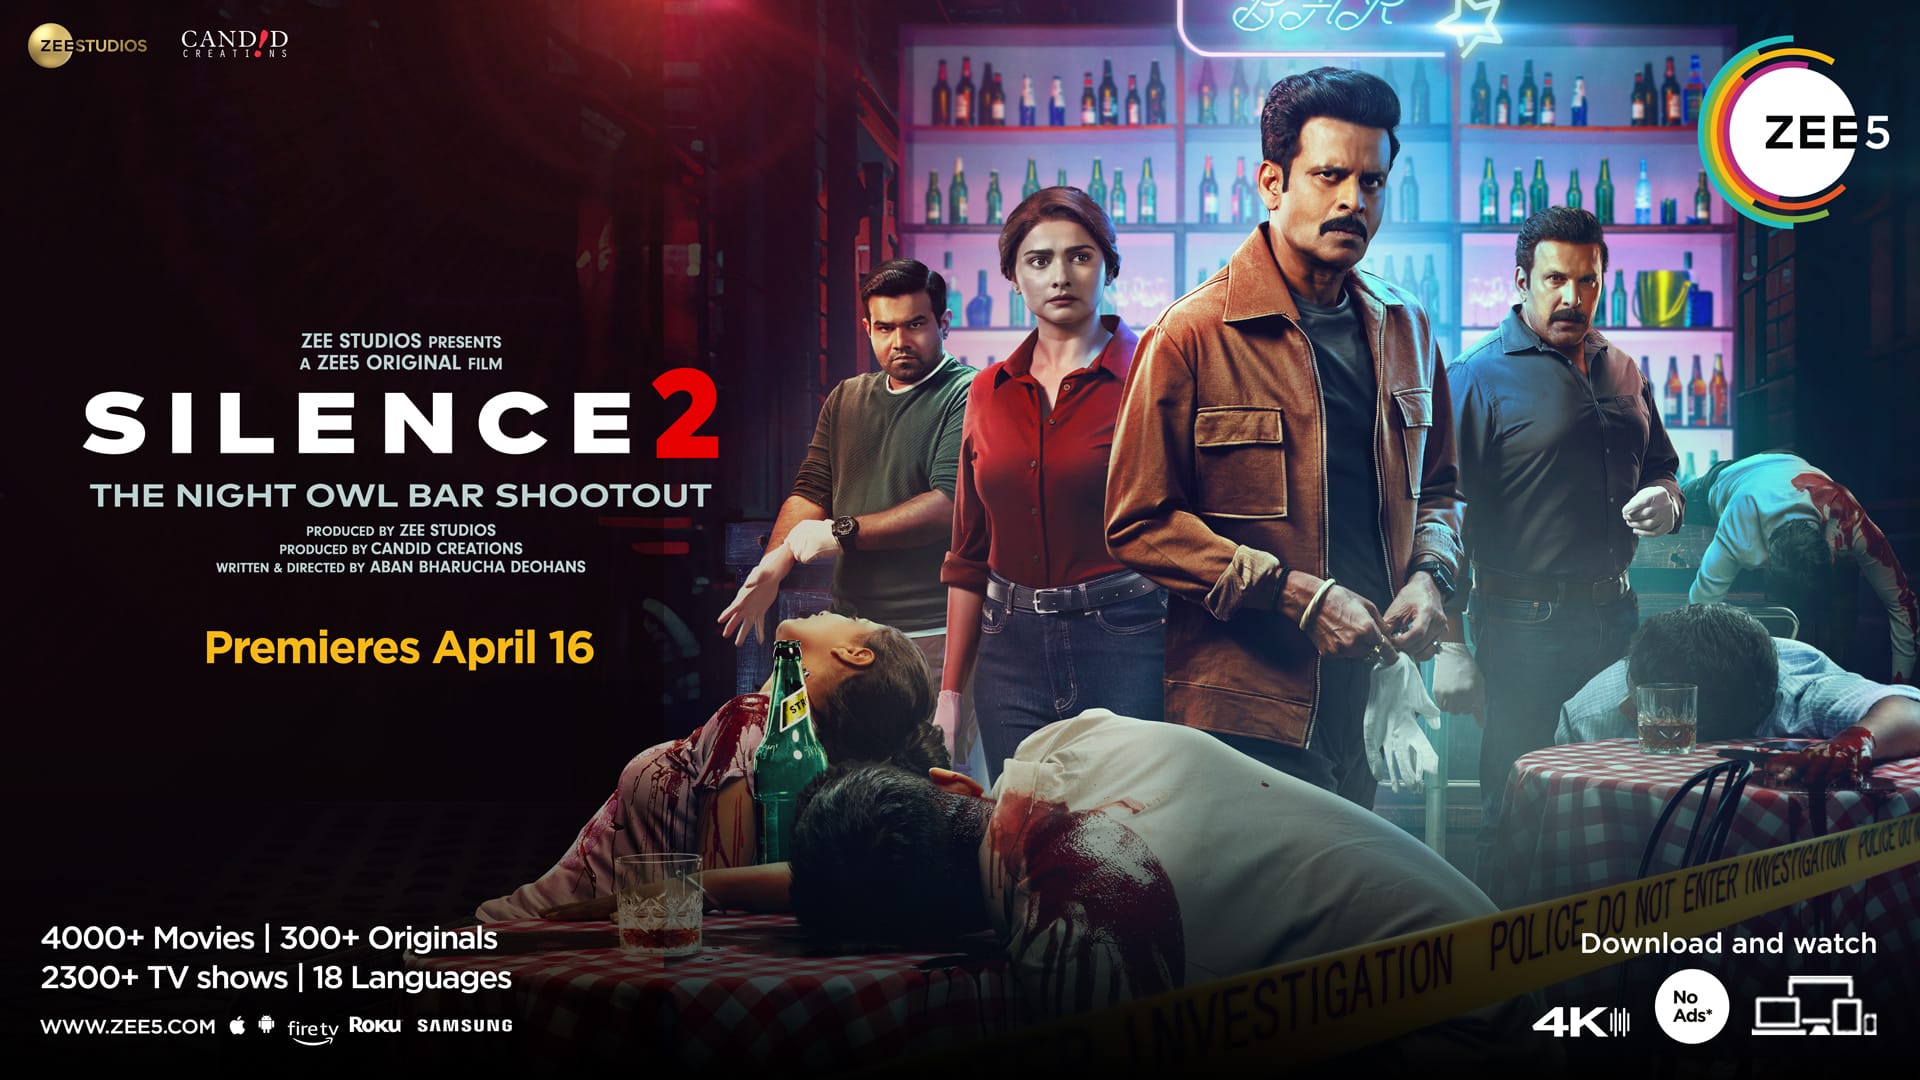 Stream Silence 2: The Night Owl Bar Shootout from April 16 exclusively on ZEE5 Global!